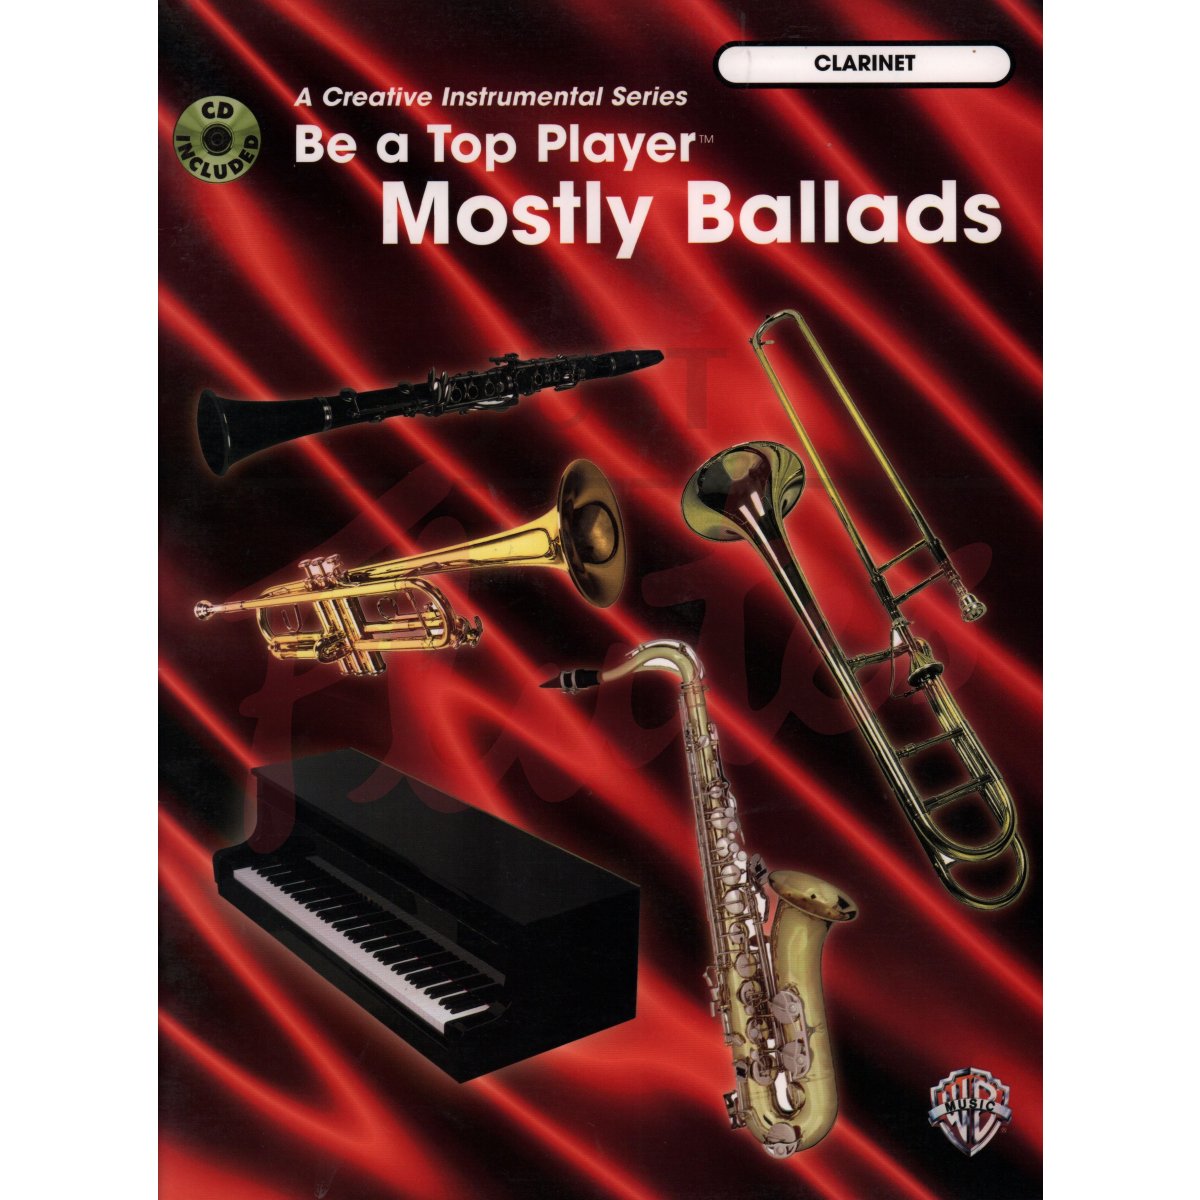 Be A Top Player: Mostly Ballads [Clarinet]